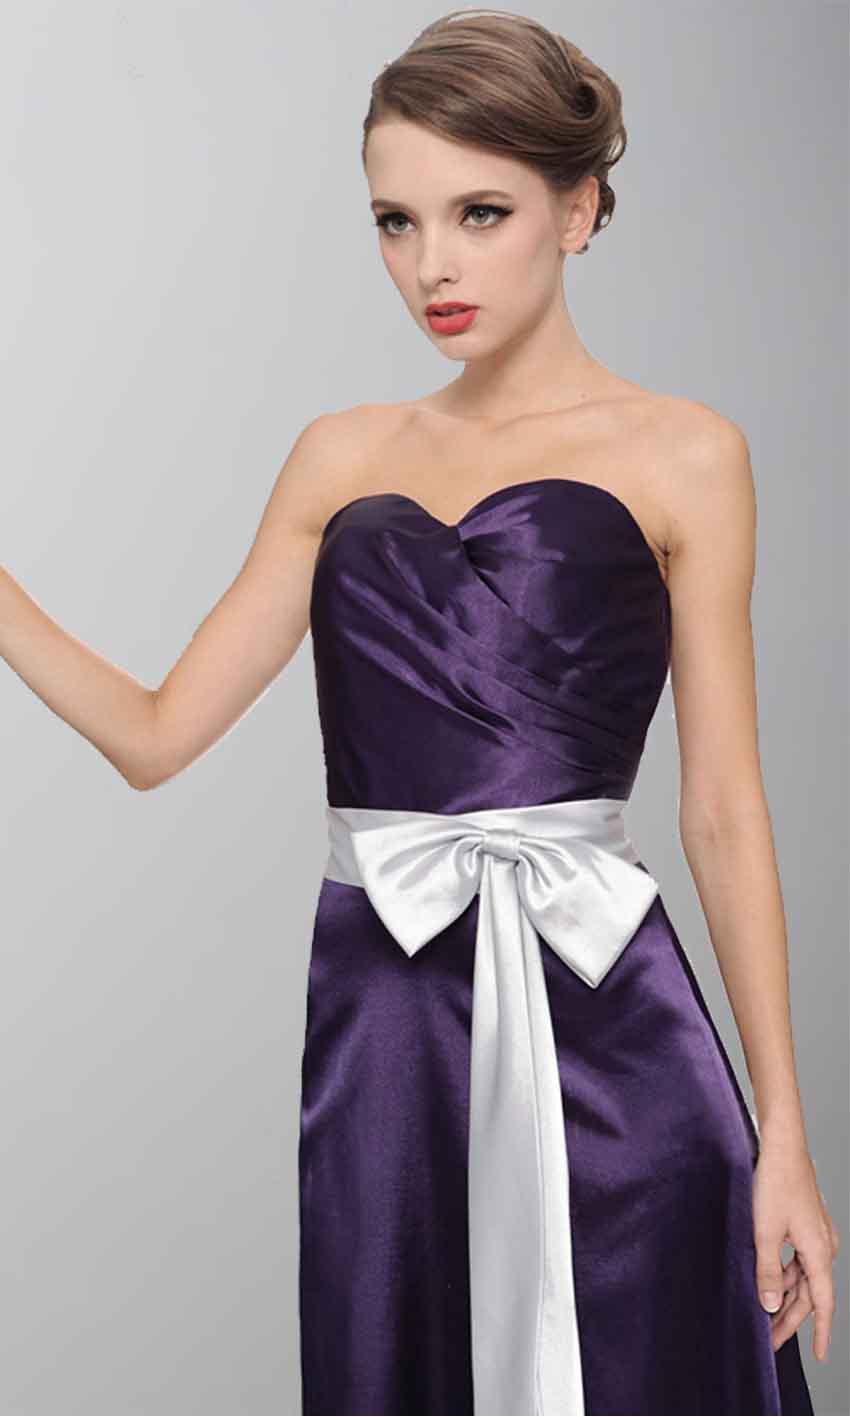 Mariage - Purple Strapless Sweetheart Satin Long Bridesmaid Dress KSP151 [KSP151] - £83.00 : Cheap Prom Dresses Uk, Bridesmaid Dresses, 2014 Prom & Evening Dresses, Look for cheap elegant prom dresses 2014, cocktail gowns, or dresses for special occasions? kissprom